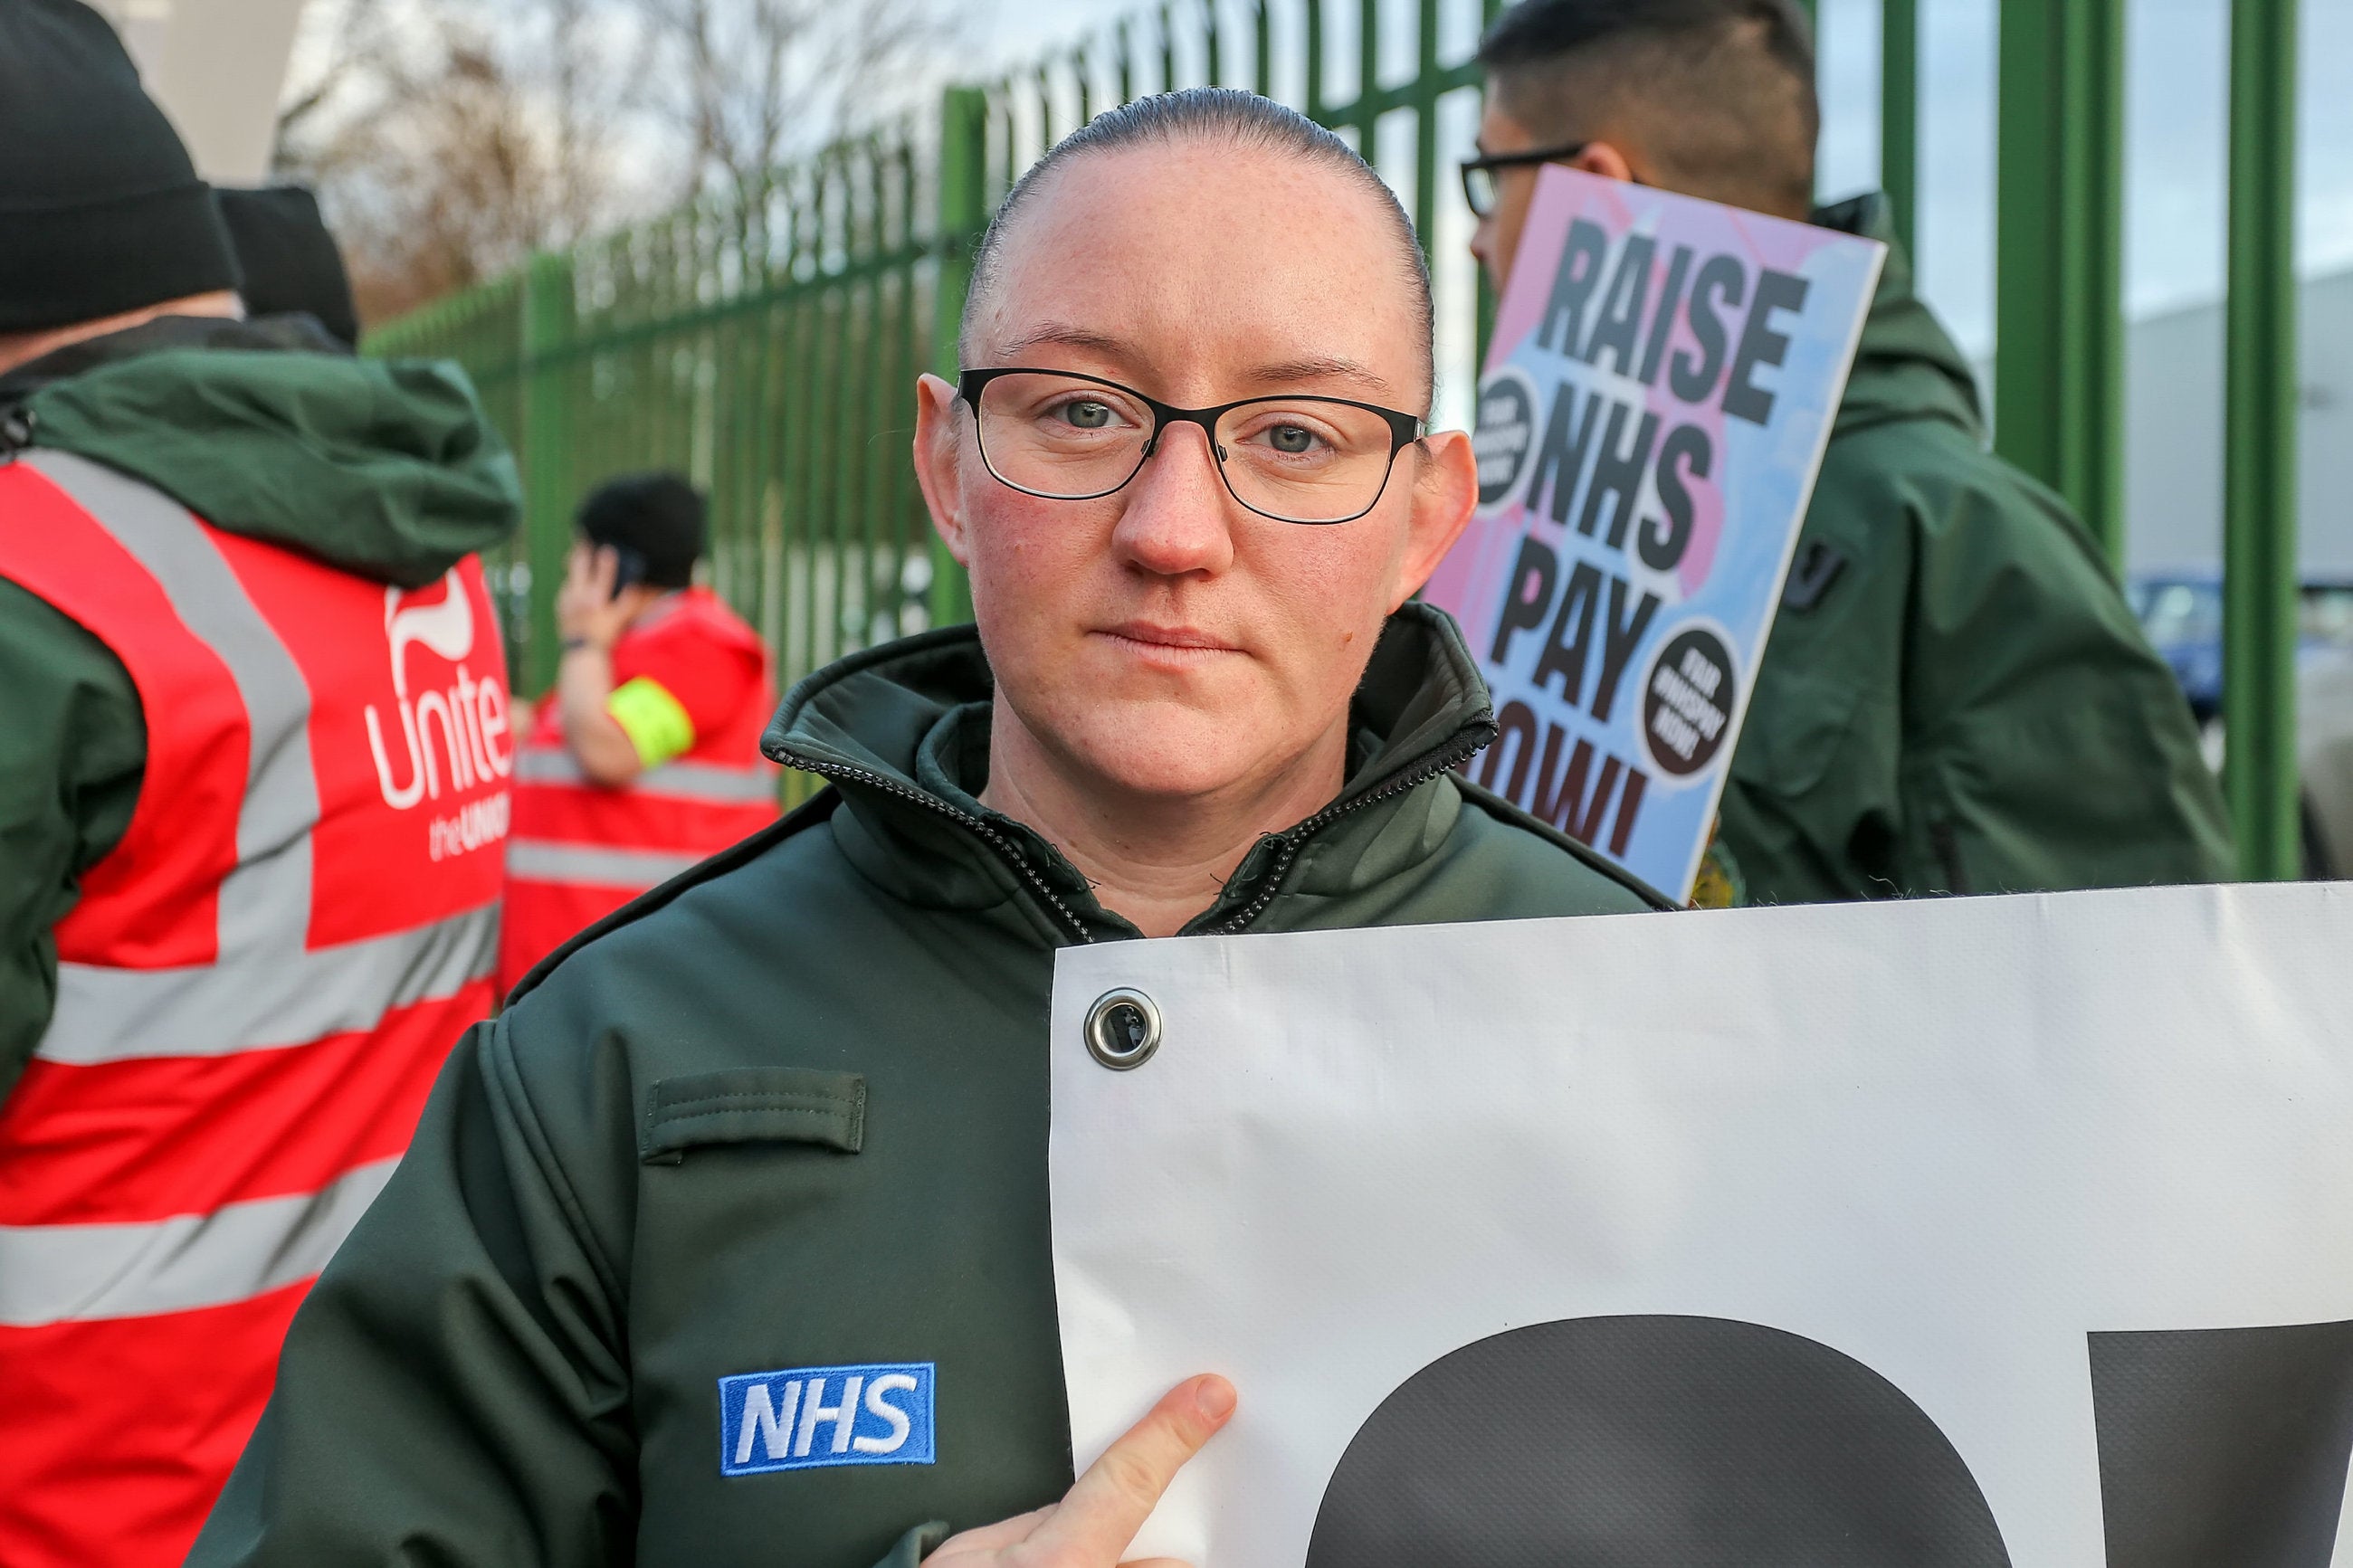 Jenny Withall, a paramedic on the picket line in Coventry